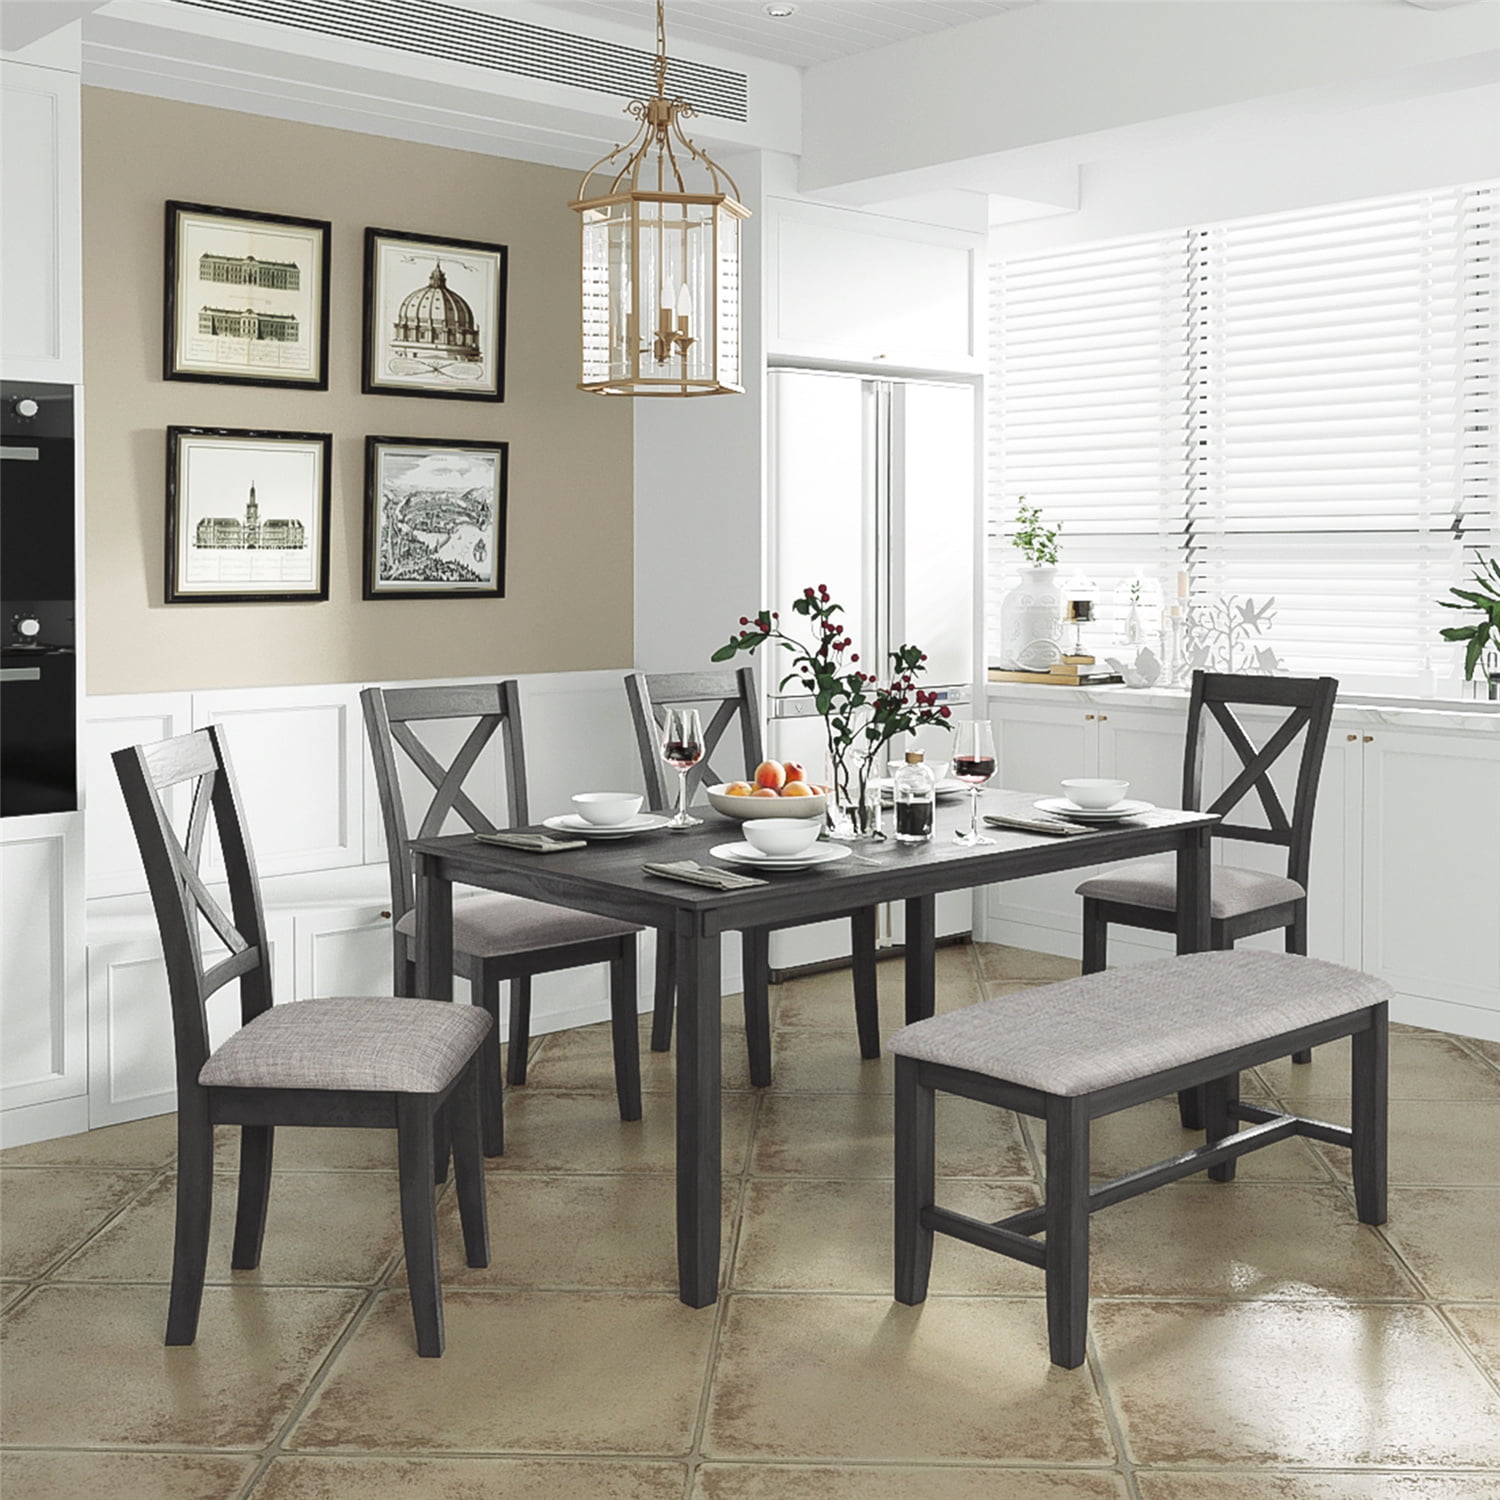 6 Piece Dining Table Set, Wood Dining Room Table and 4 Chairs with